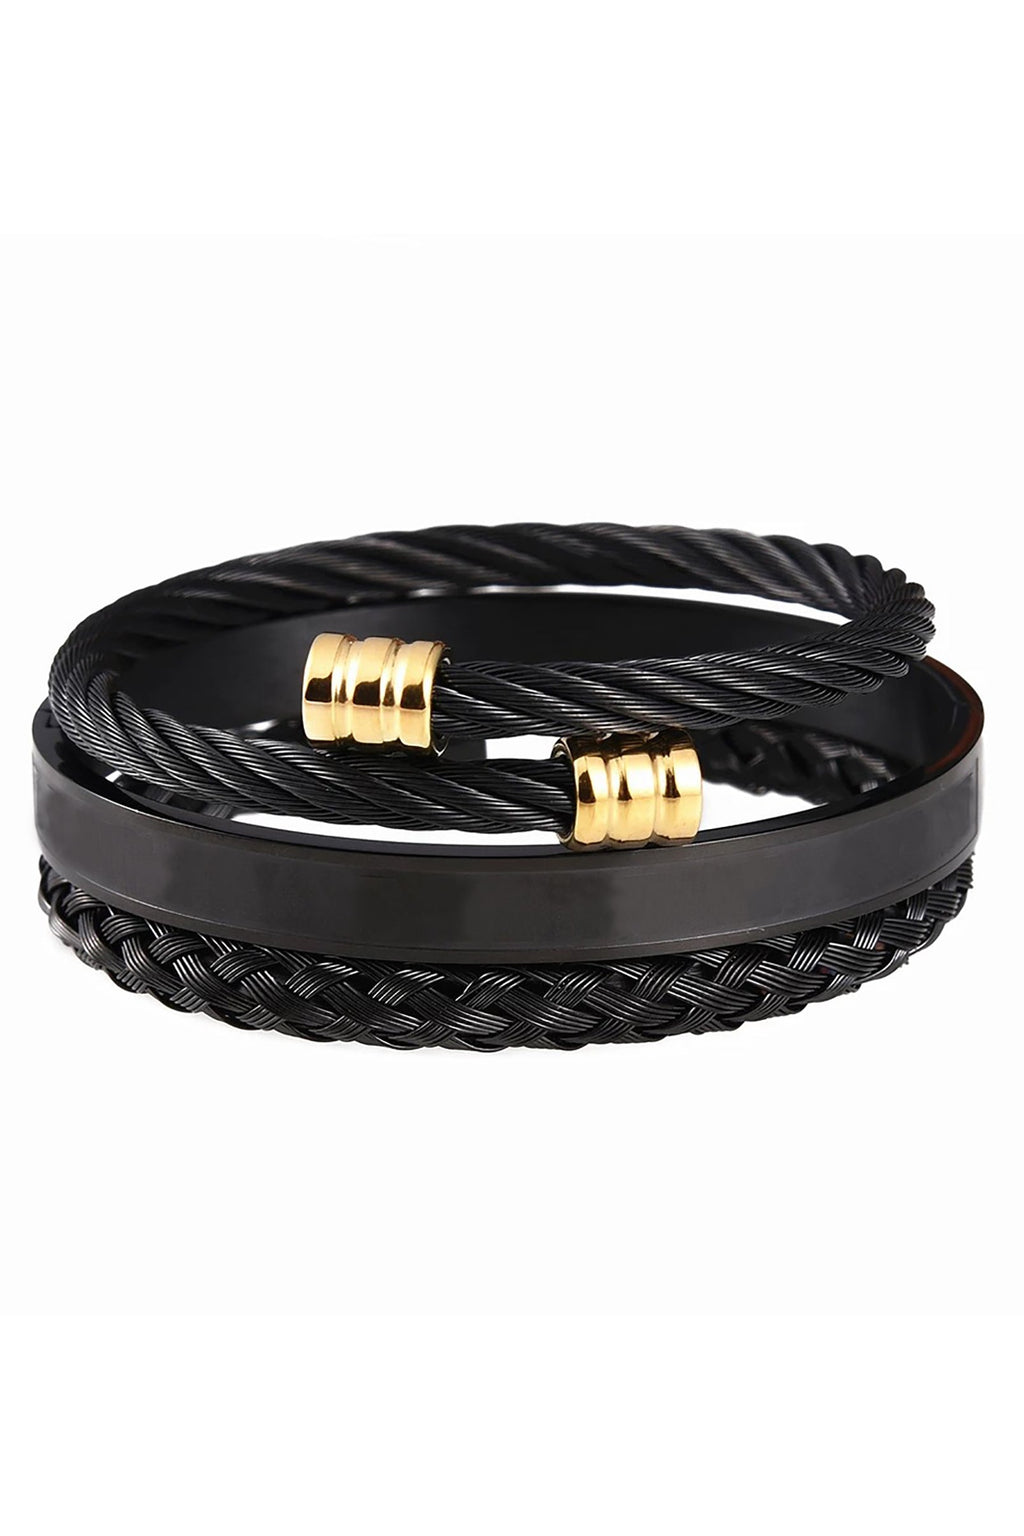 Mason Noir Bracelet Set: Elevate Your Style with This Bold and Mysterious Accessory Collection.